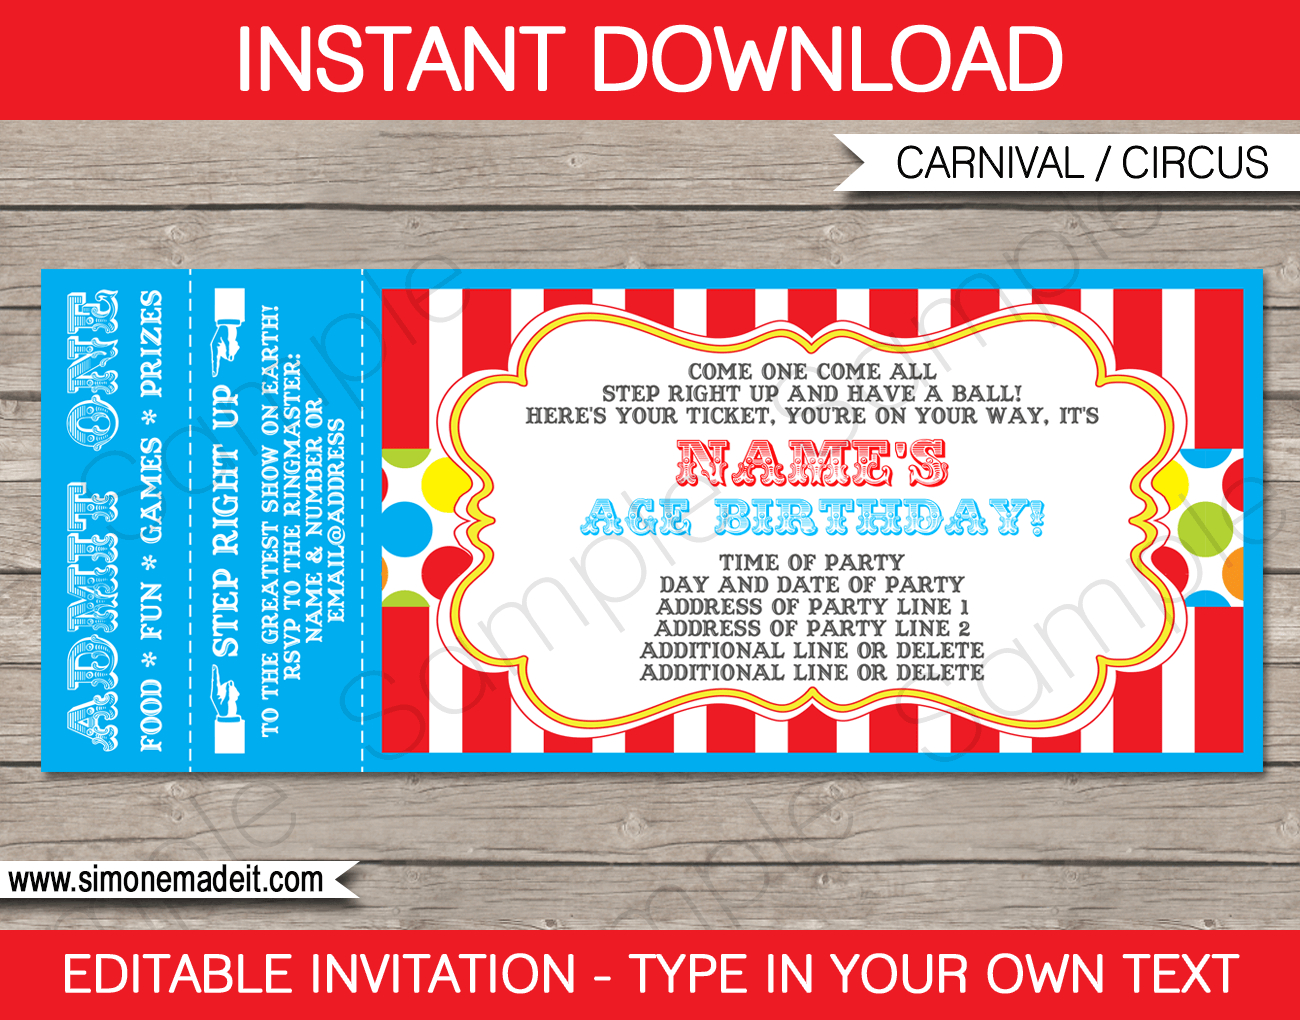 Carnival Party Ticket Invitation Template Carnival Or Circus within dimensions 1300 X 1020